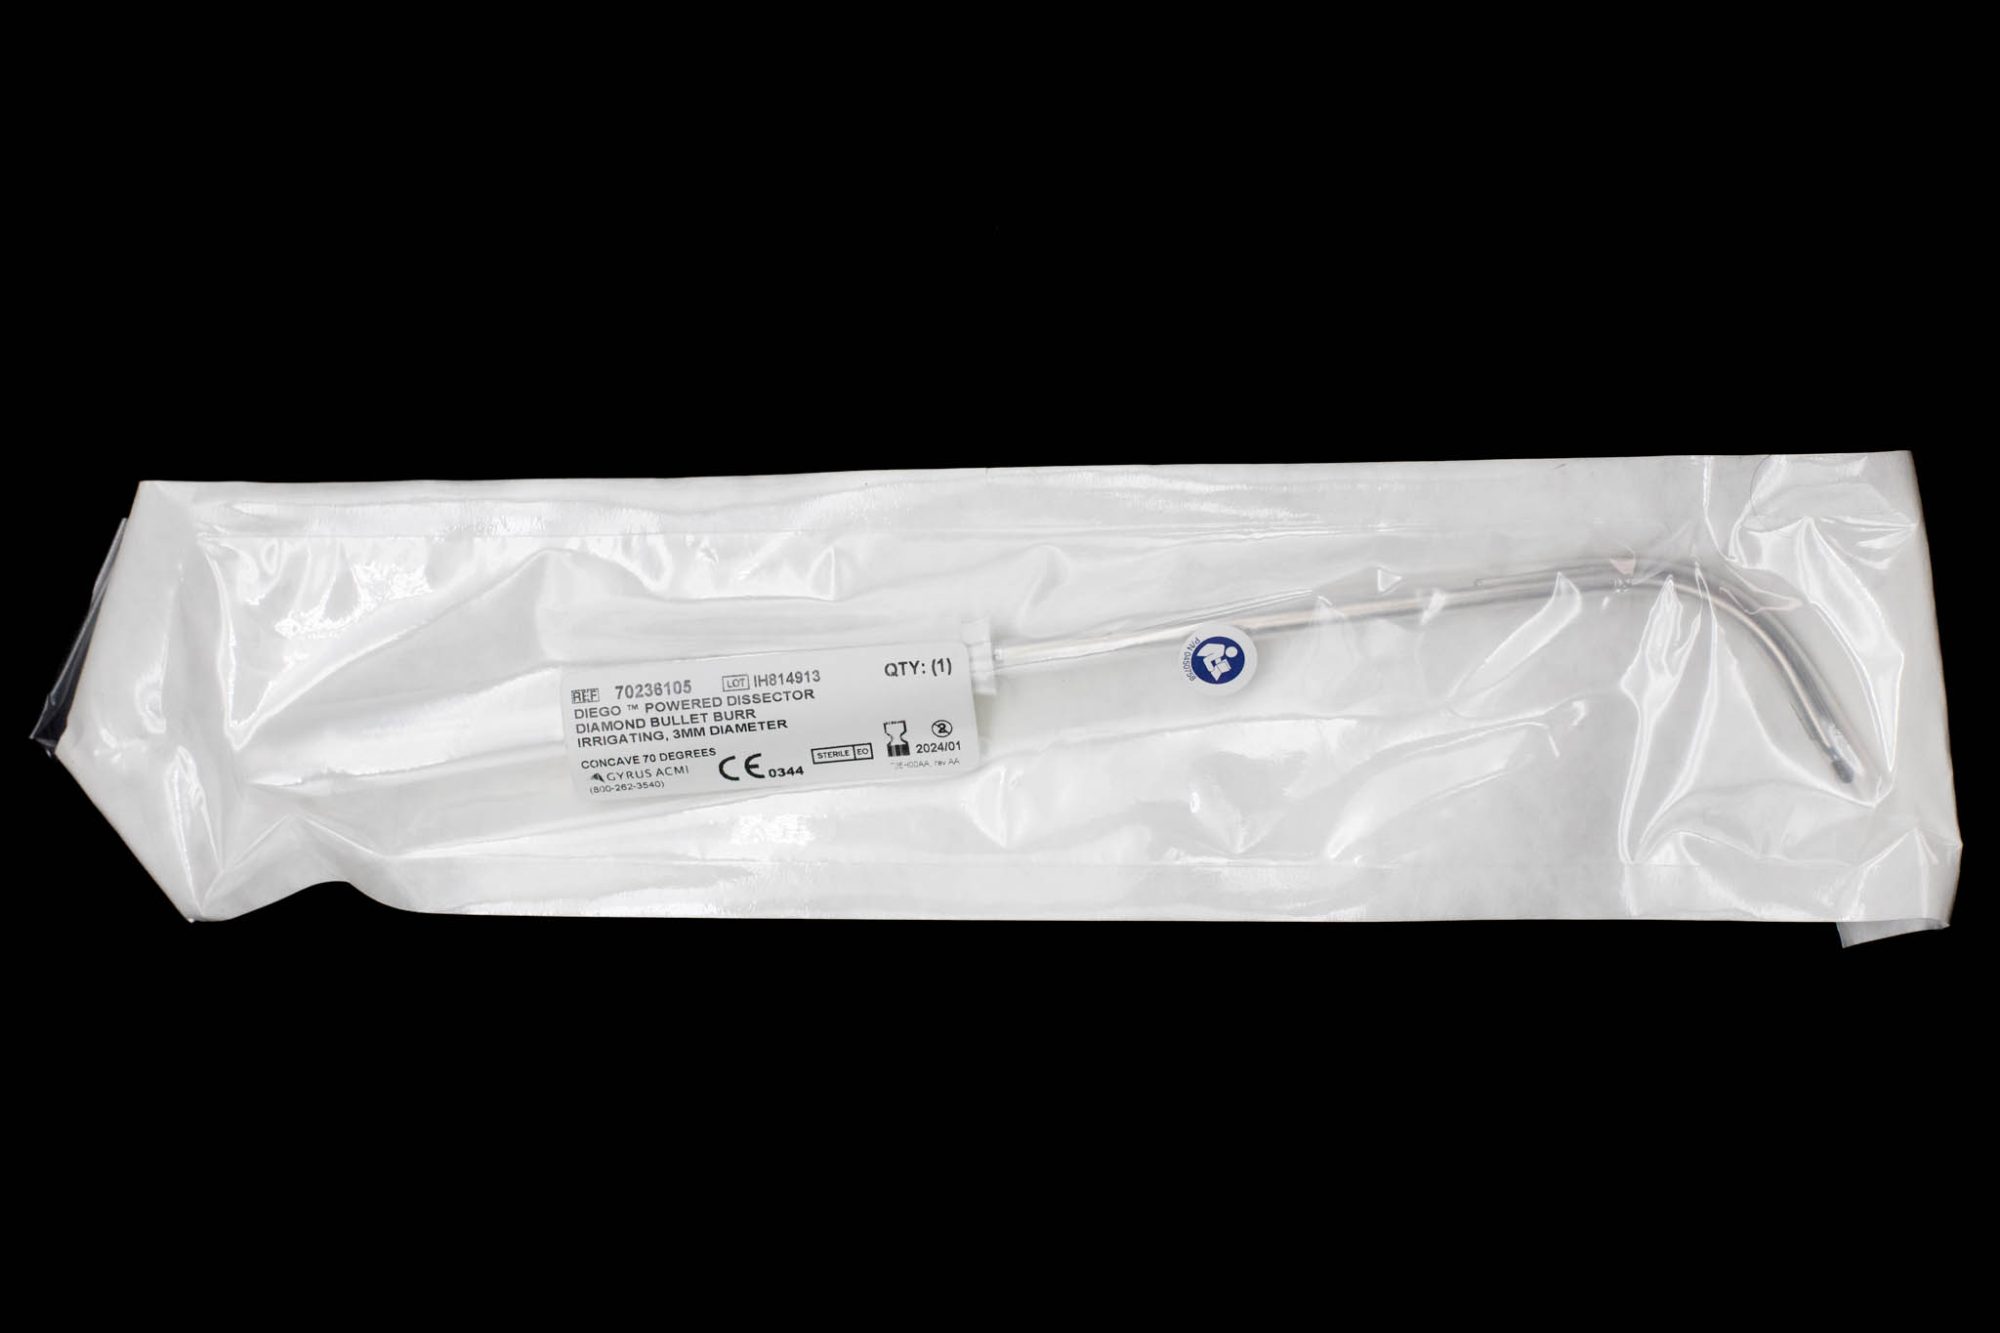 Disposable Diego Powered Dissector, Diamond Bullet Burr, Irrigating, 3mm Dia, Concave 70 Deg. - 70236105 [1/Bag]